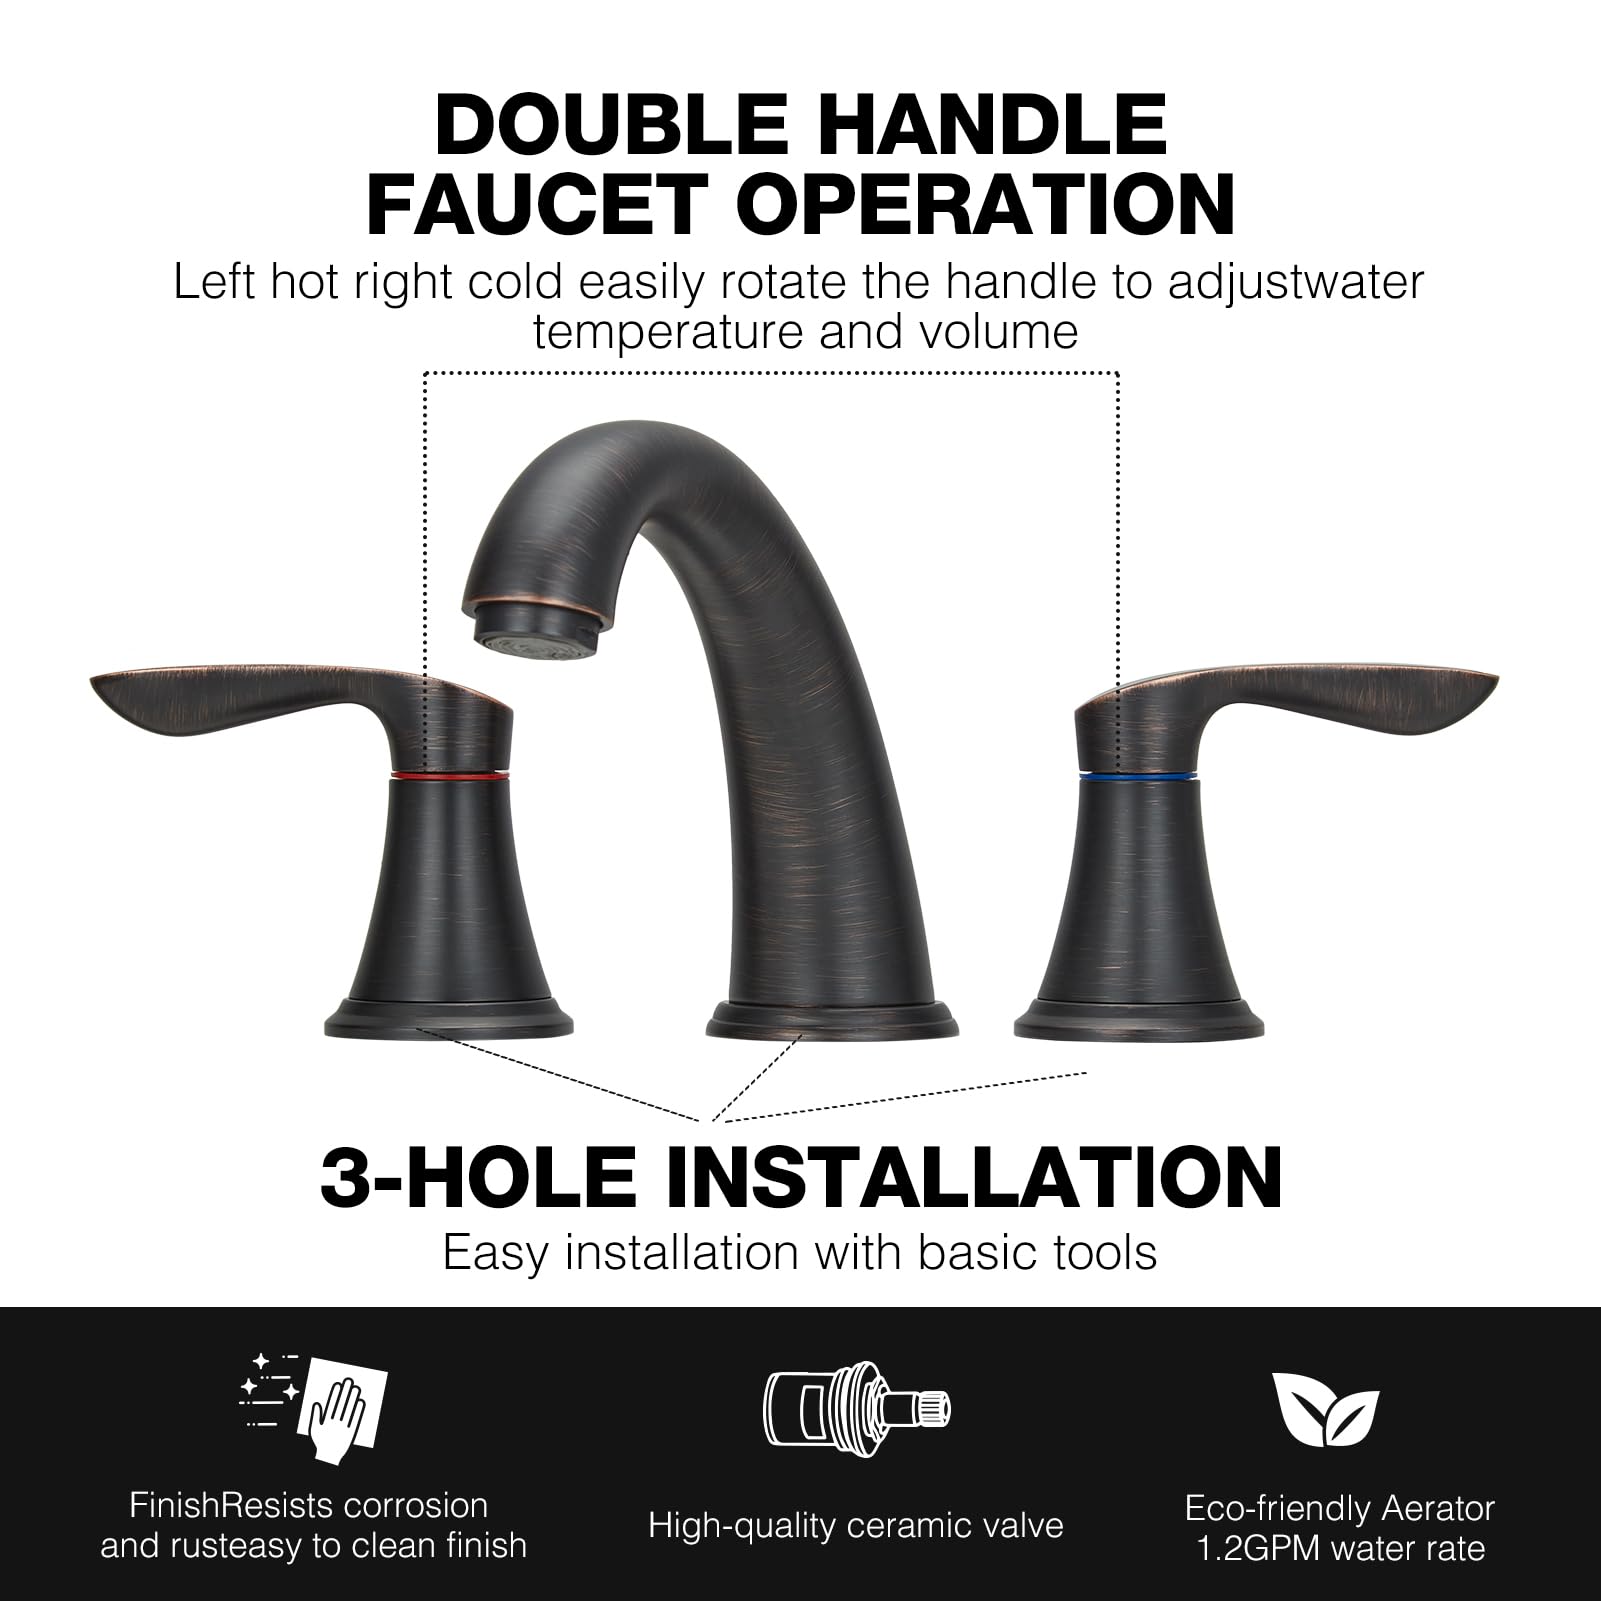 Bathroom Faucet, 8 Inch Bathroom Faucets for Sink 3 Hole, Widespread Oil Rubbed Bronze Bathroom Faucet with Pop up Drain and cUPC Lead-Free Hose